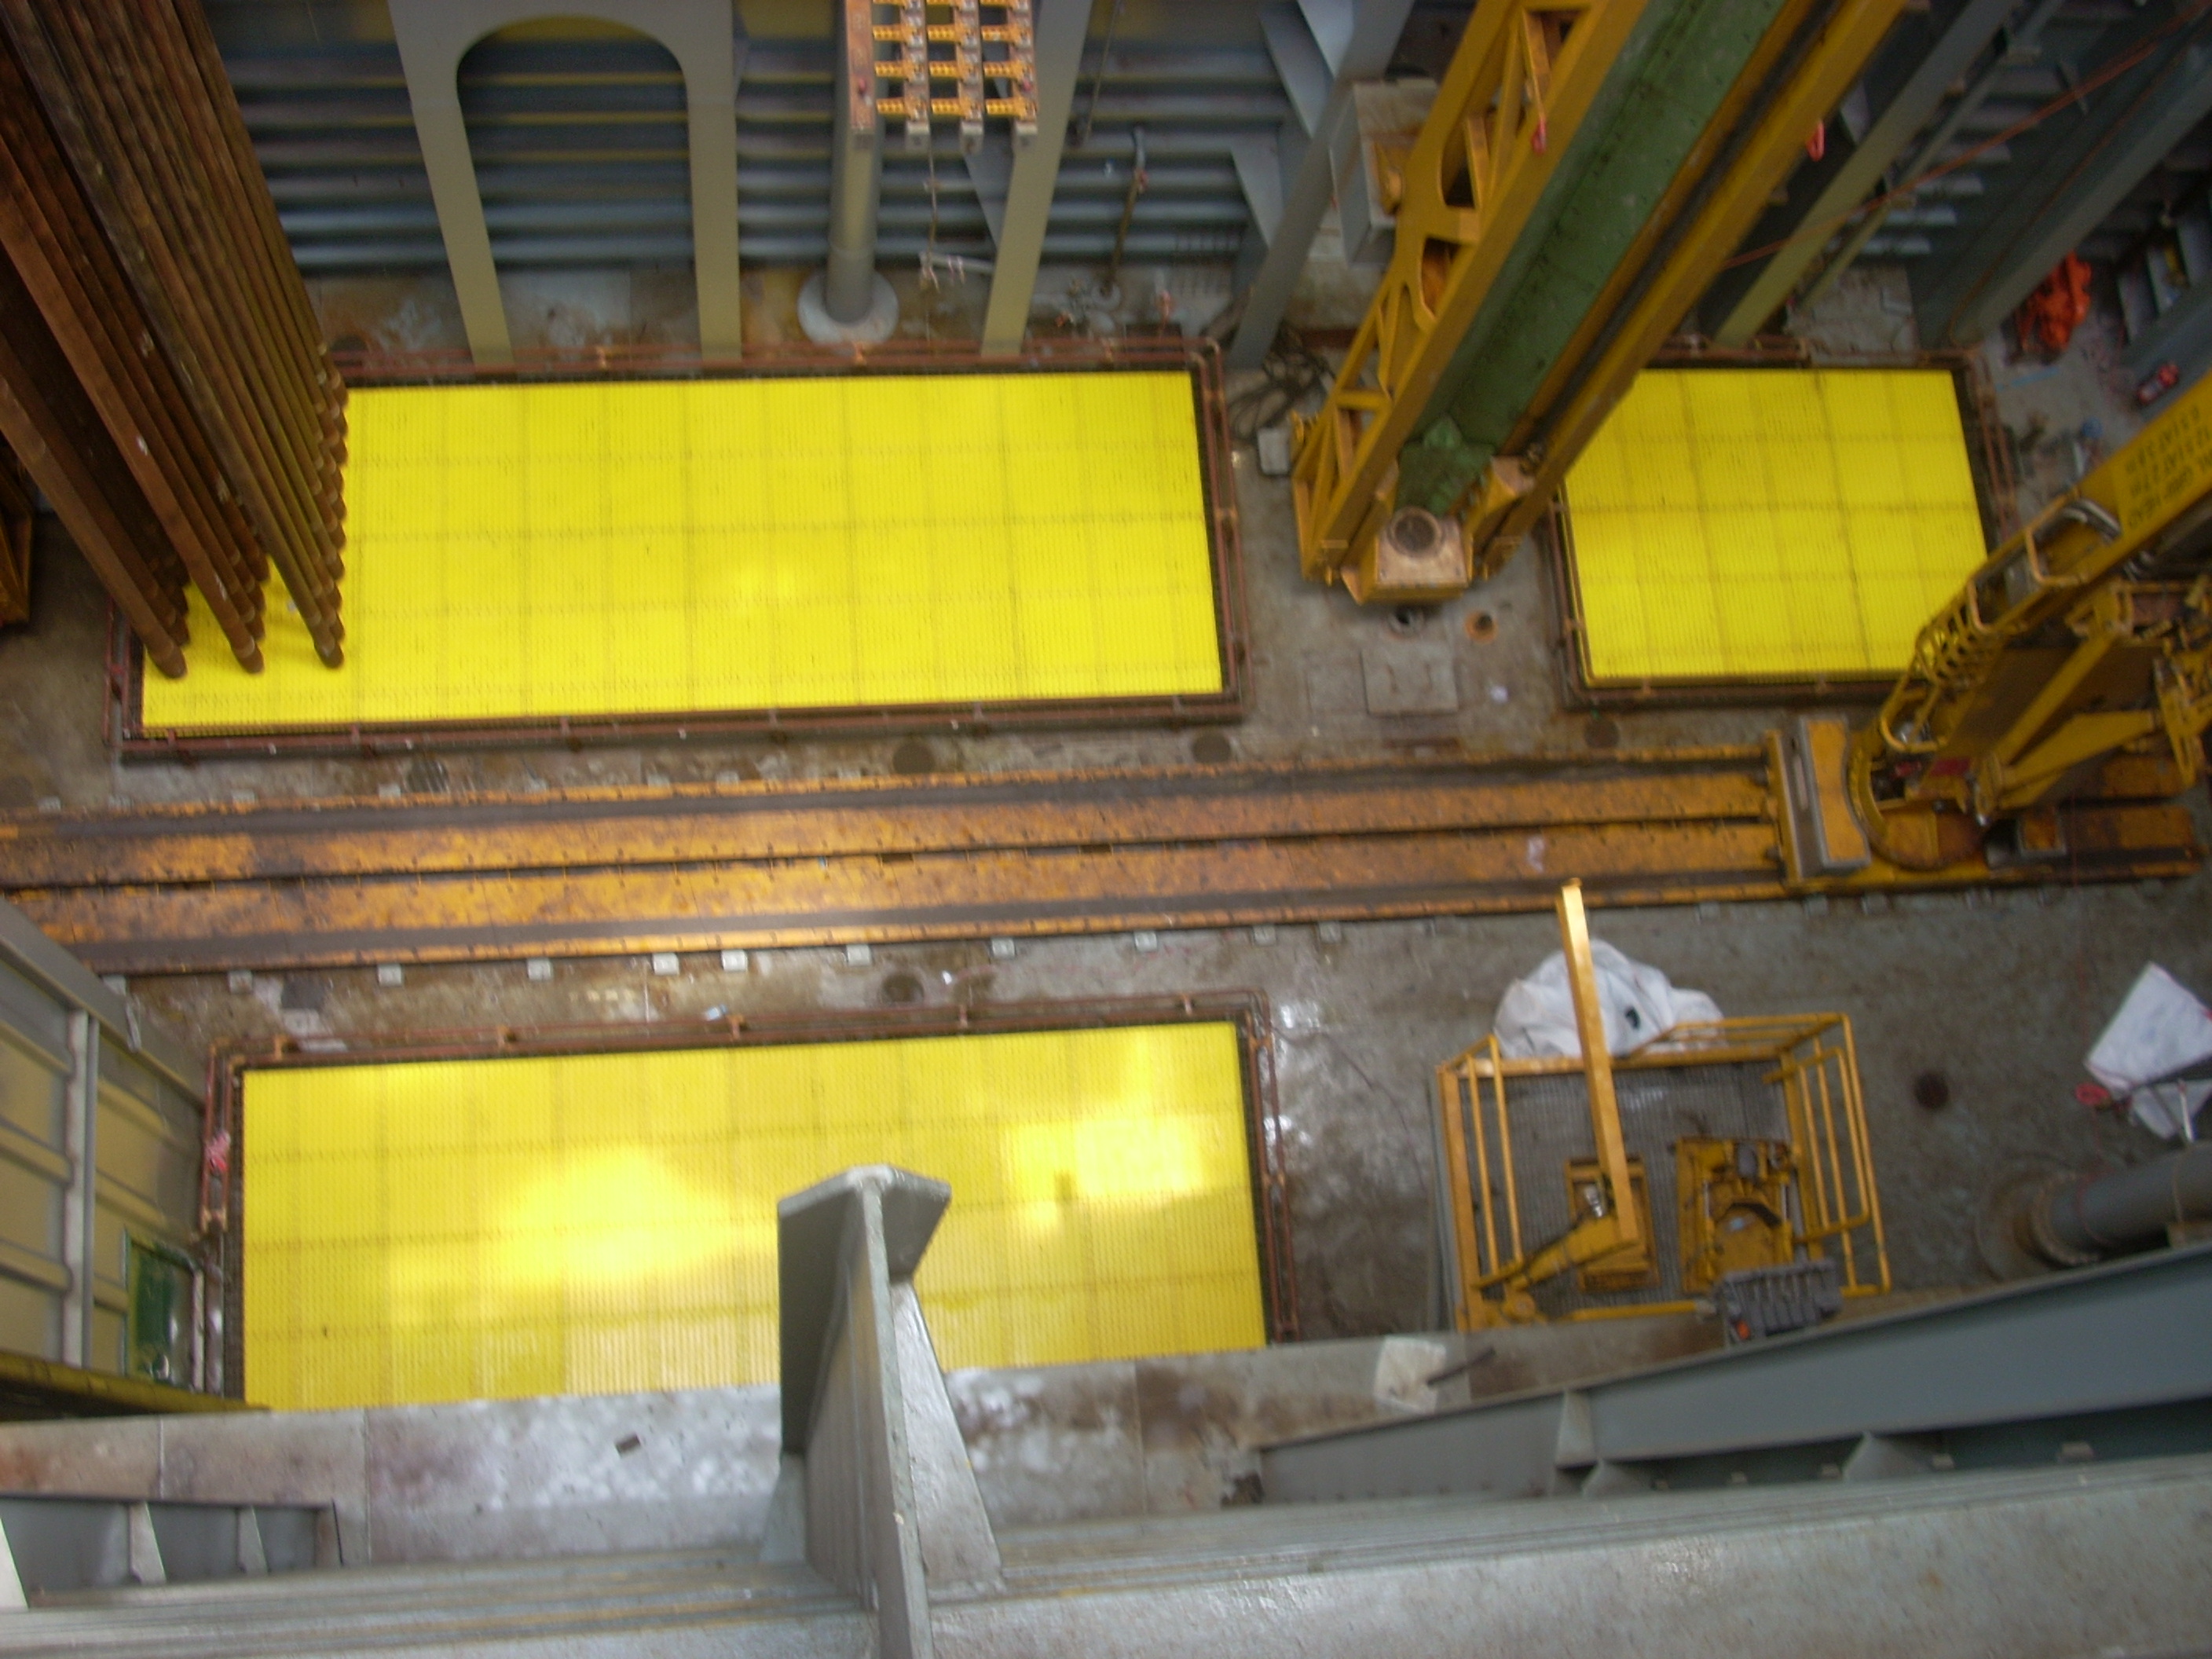 Rig Floor Traction and Safety Matting